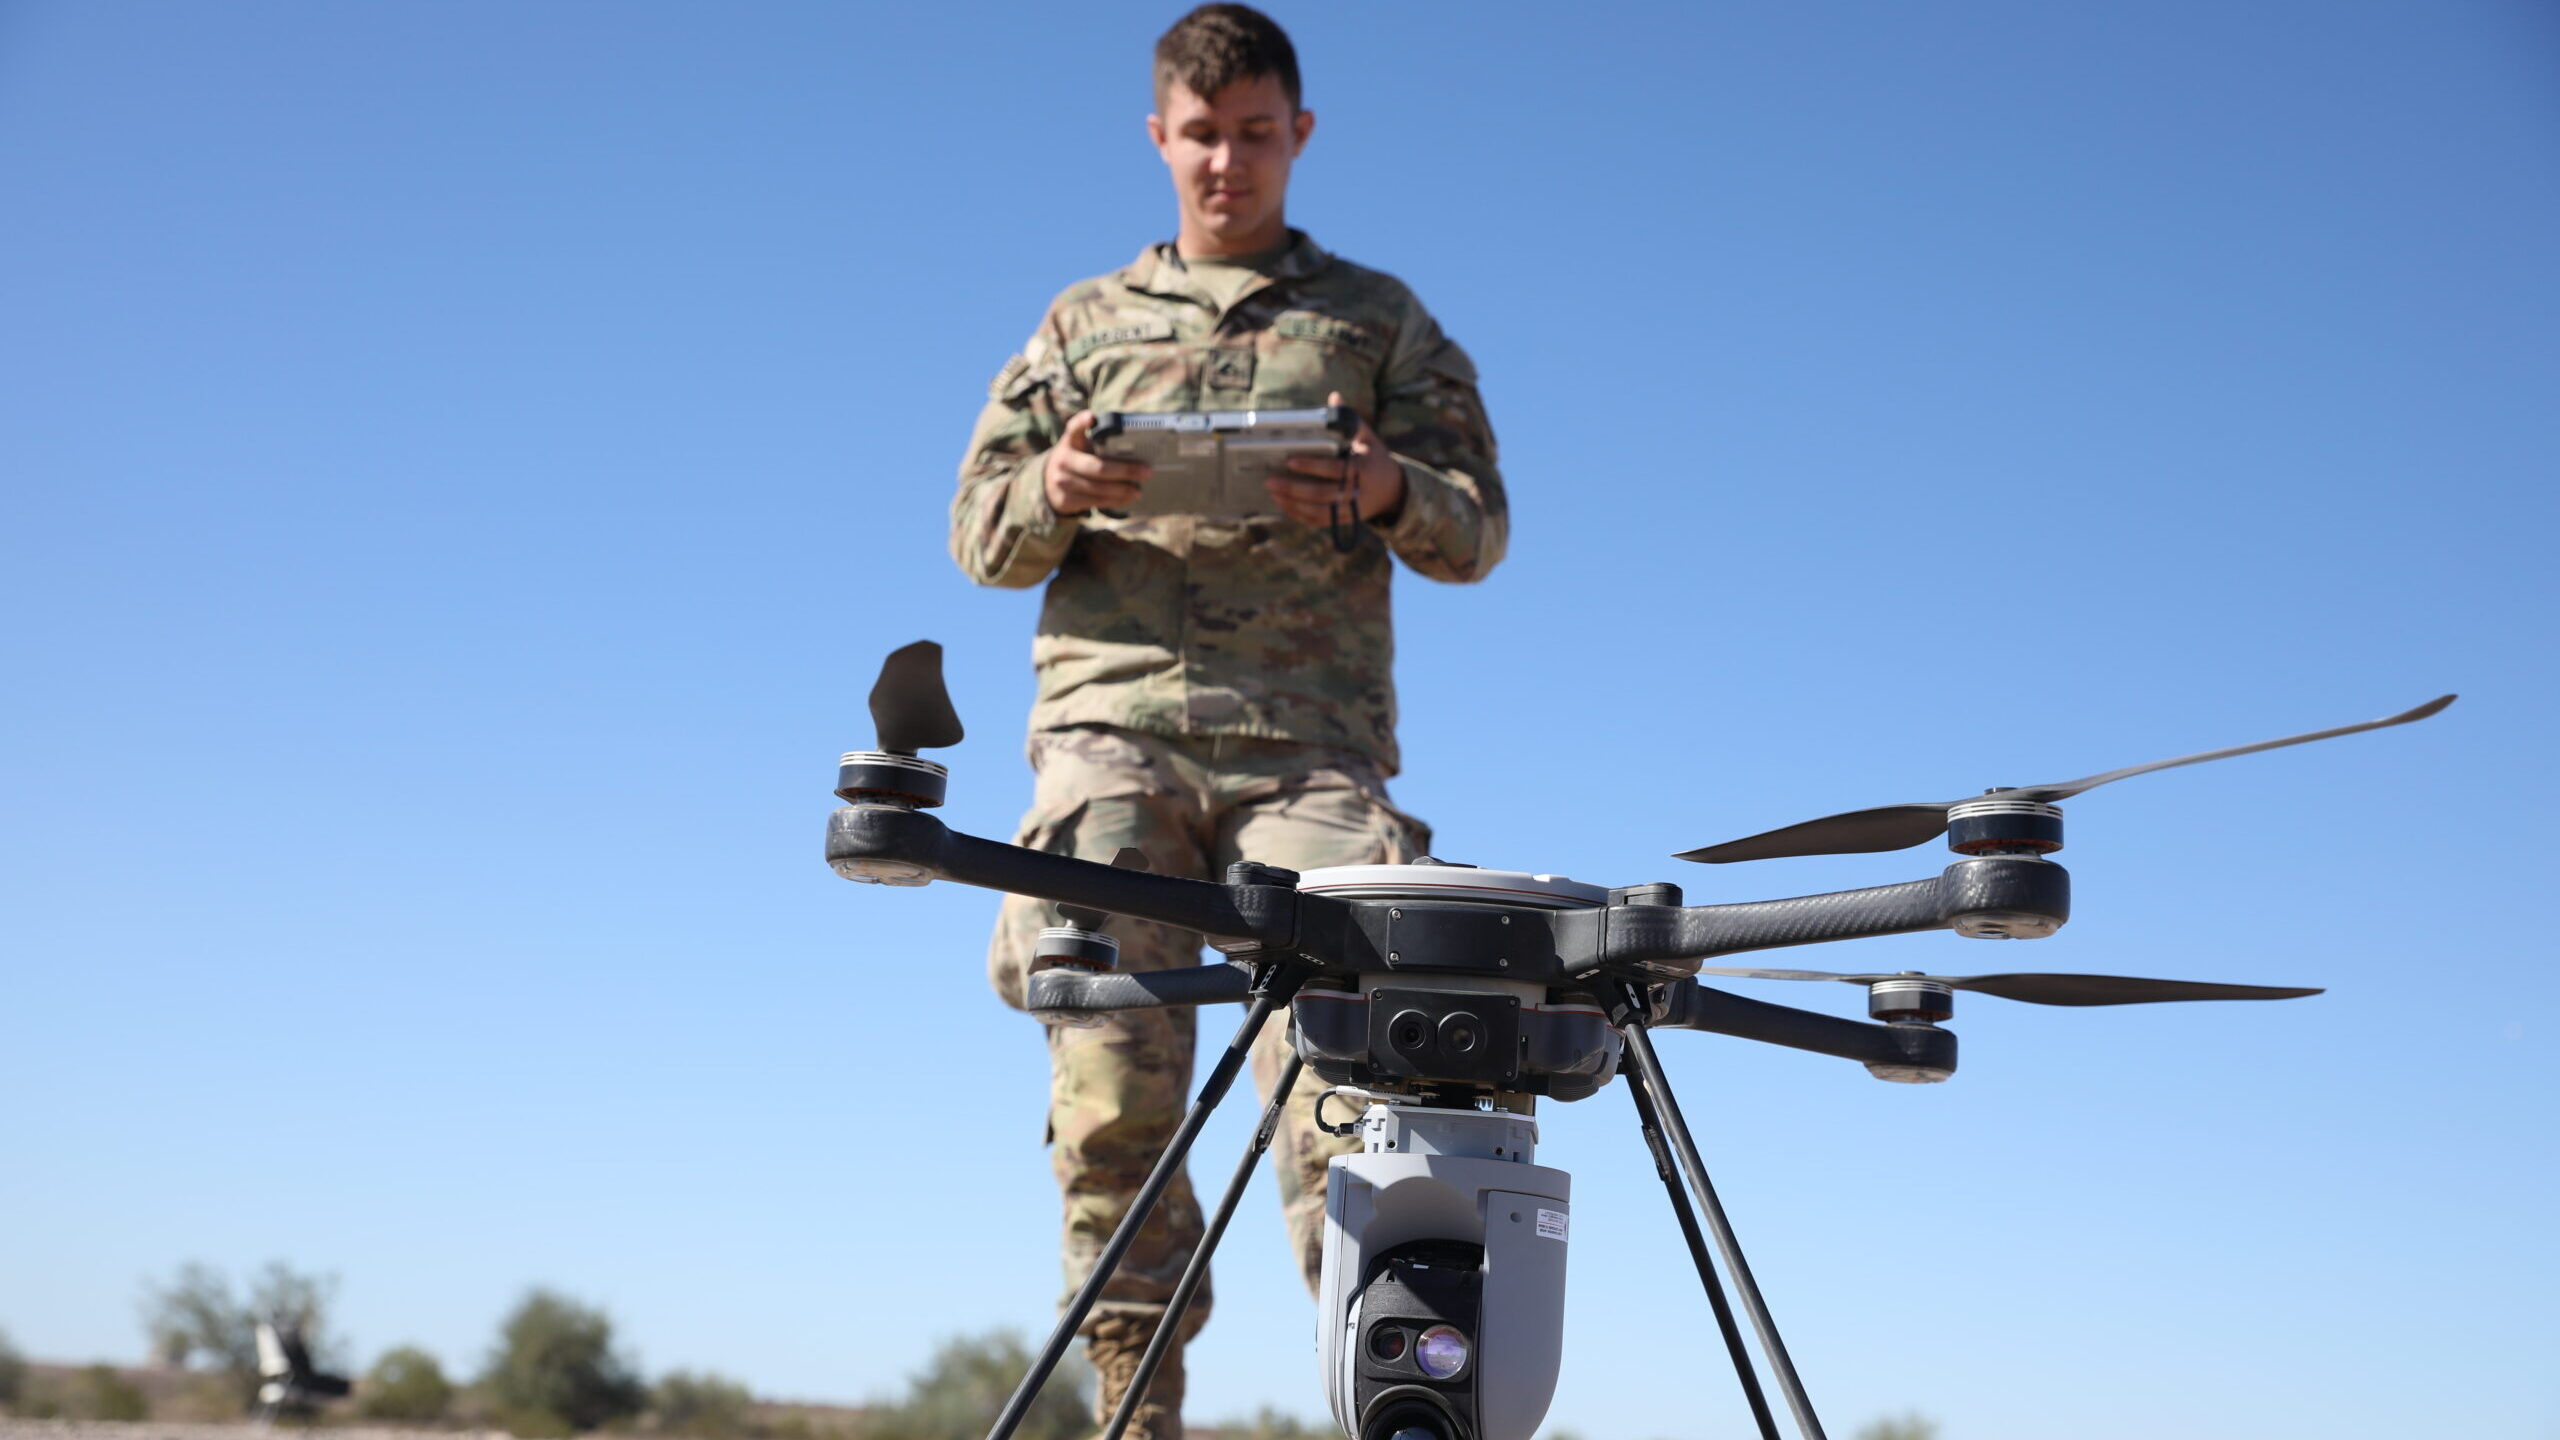 Project Convergence 21 – Unmanned Aerial System